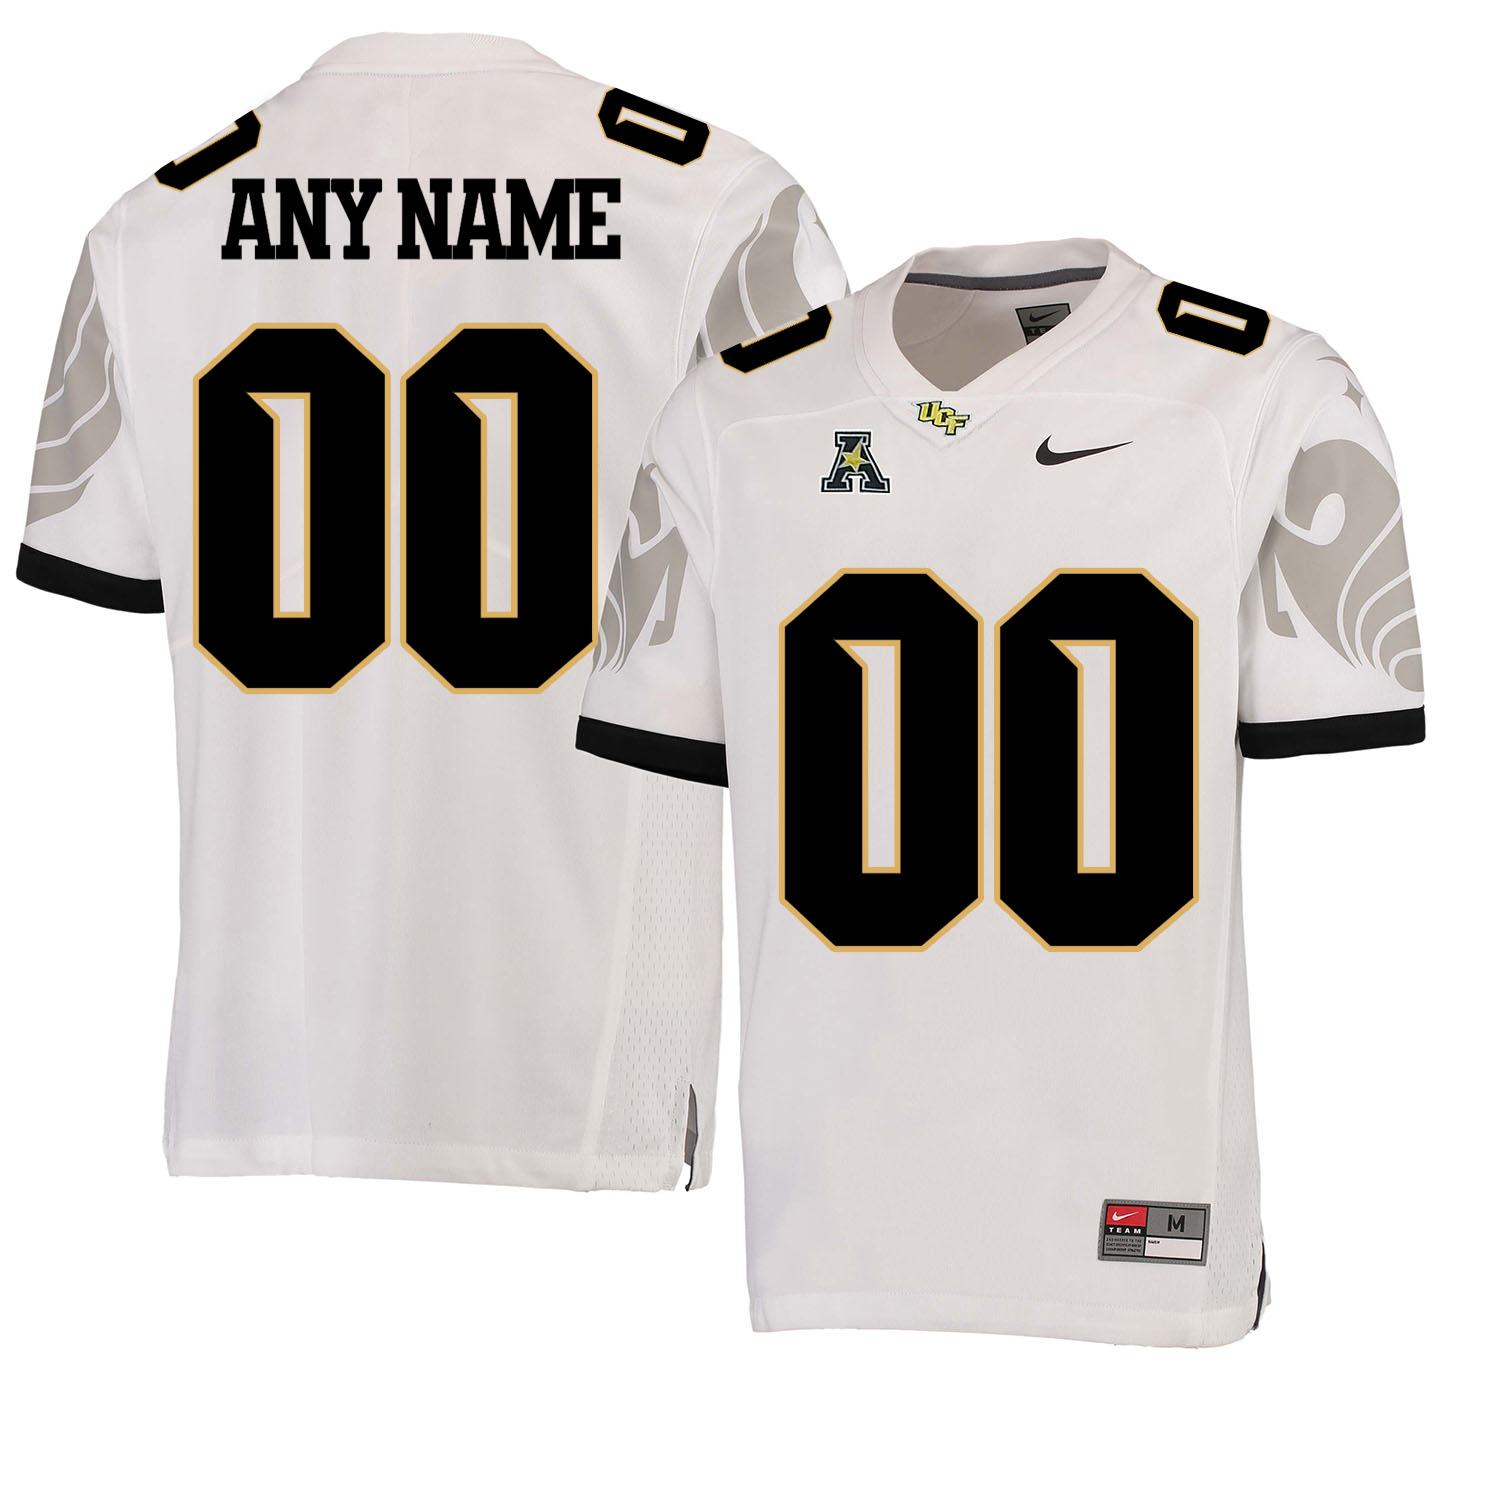 UCF Knights White Men's Customized College Football Jersey